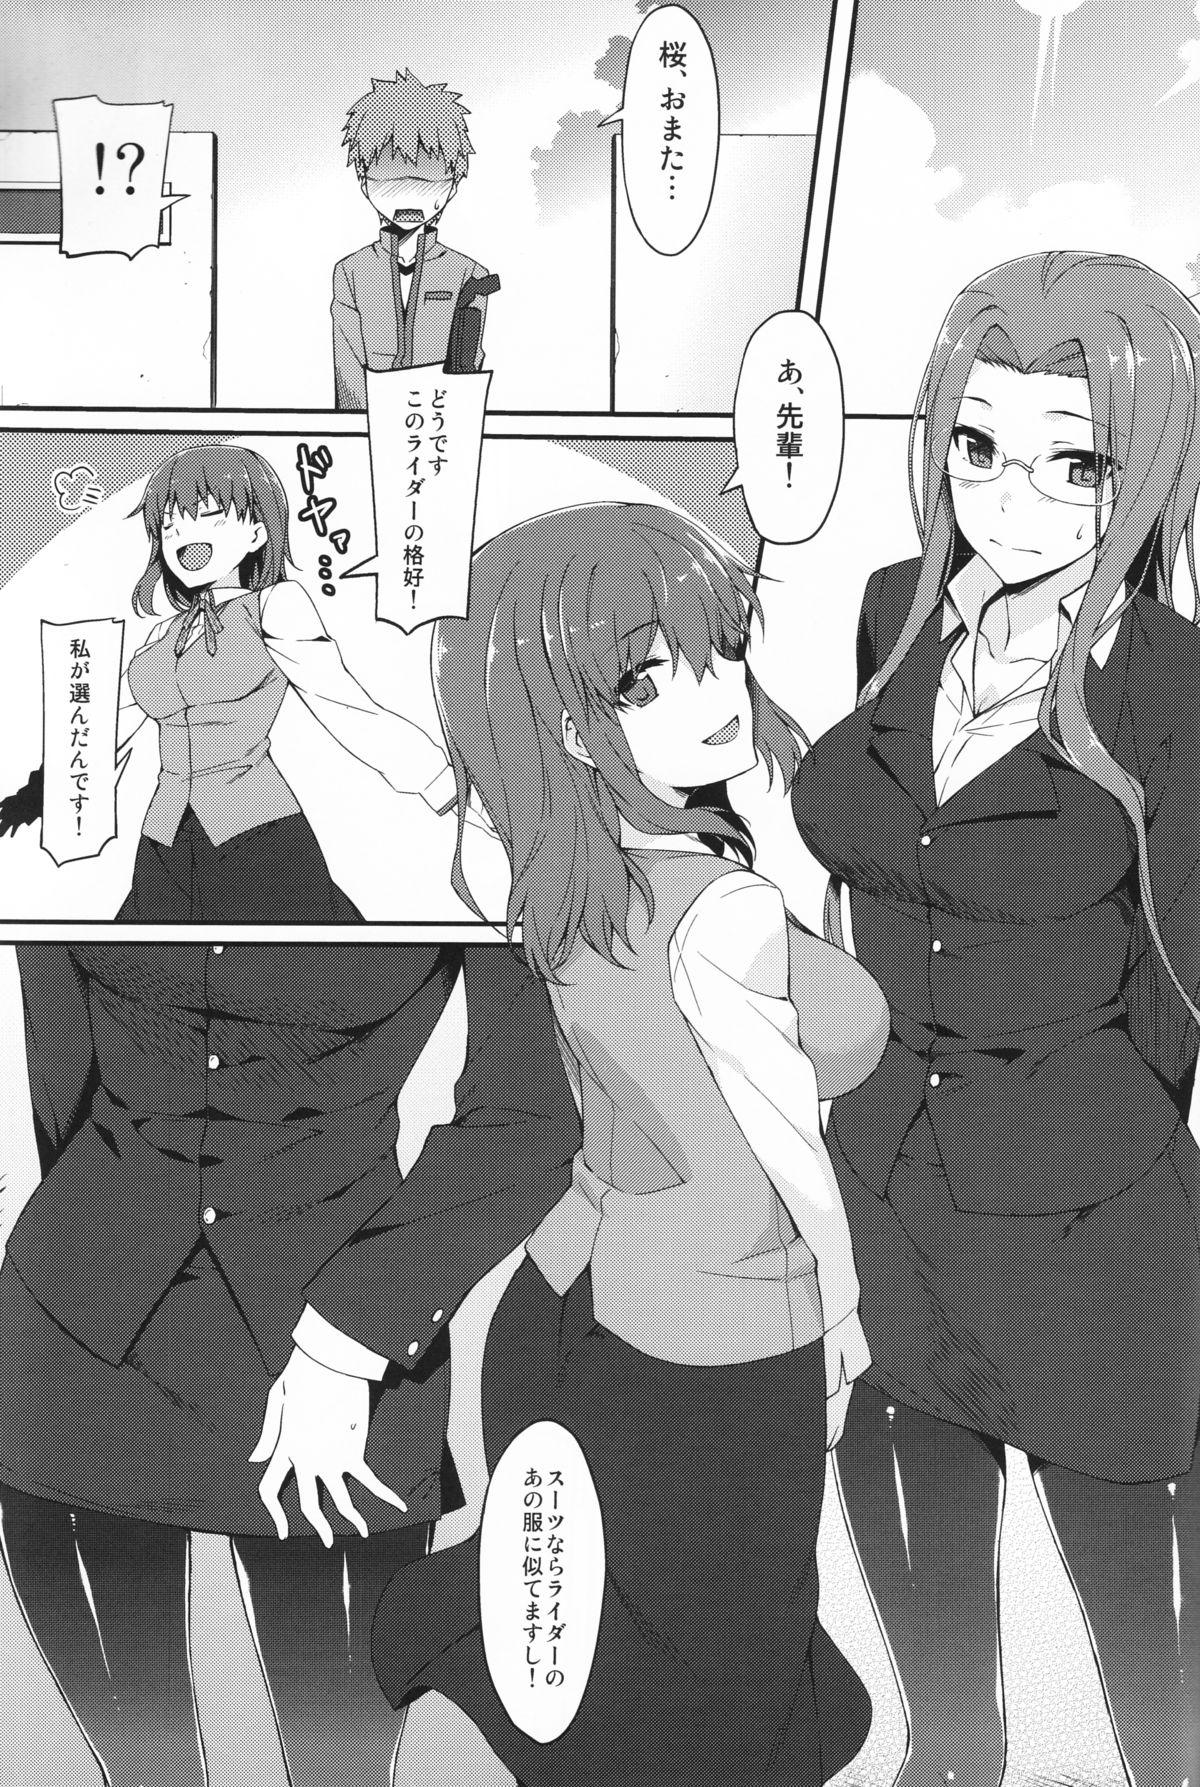 Class Room Rider-san to Kuro Stocking. - Fate stay night Oral - Page 2